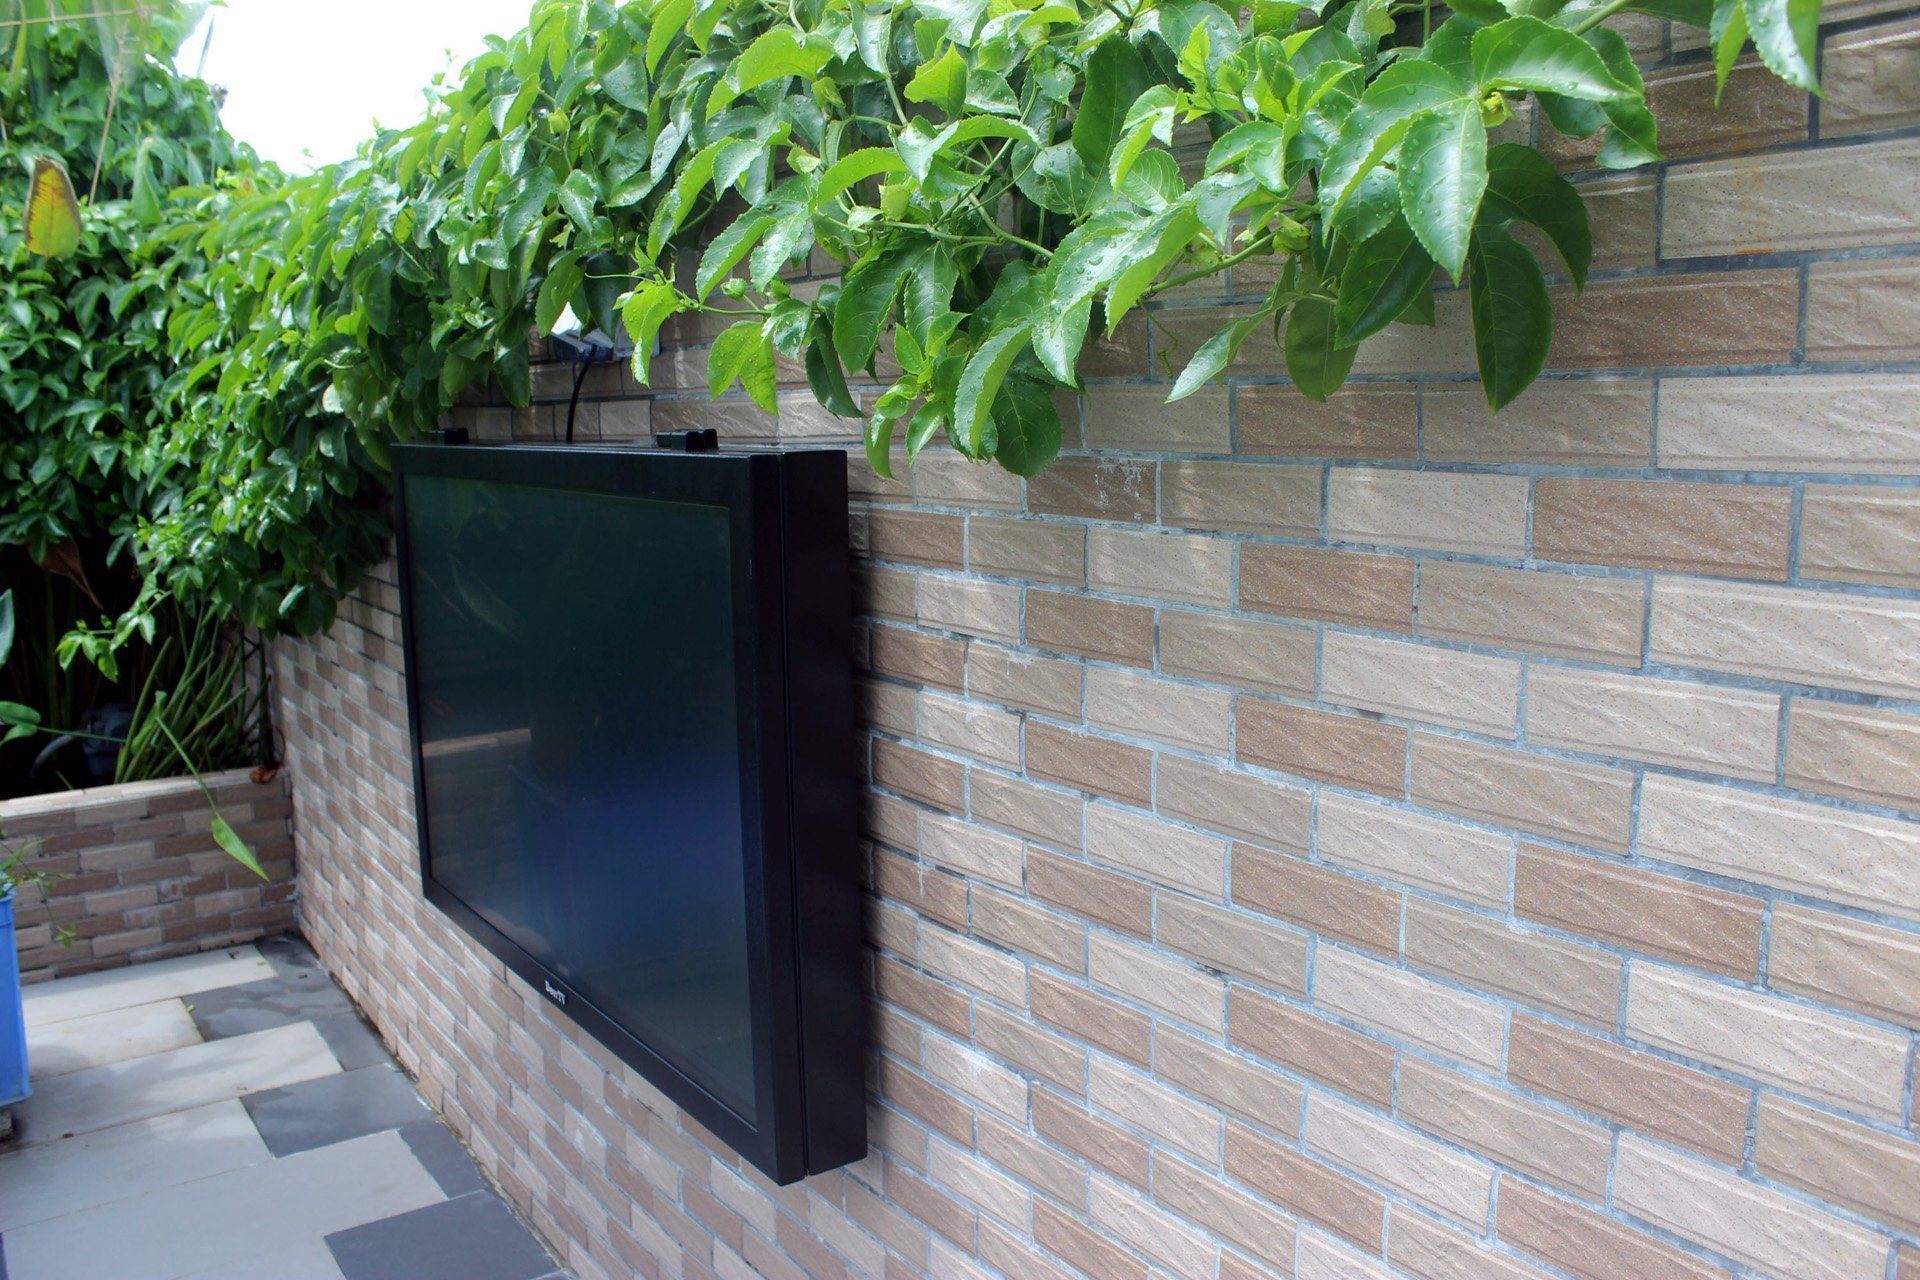 Where I can buy the Outdoor TV Box?